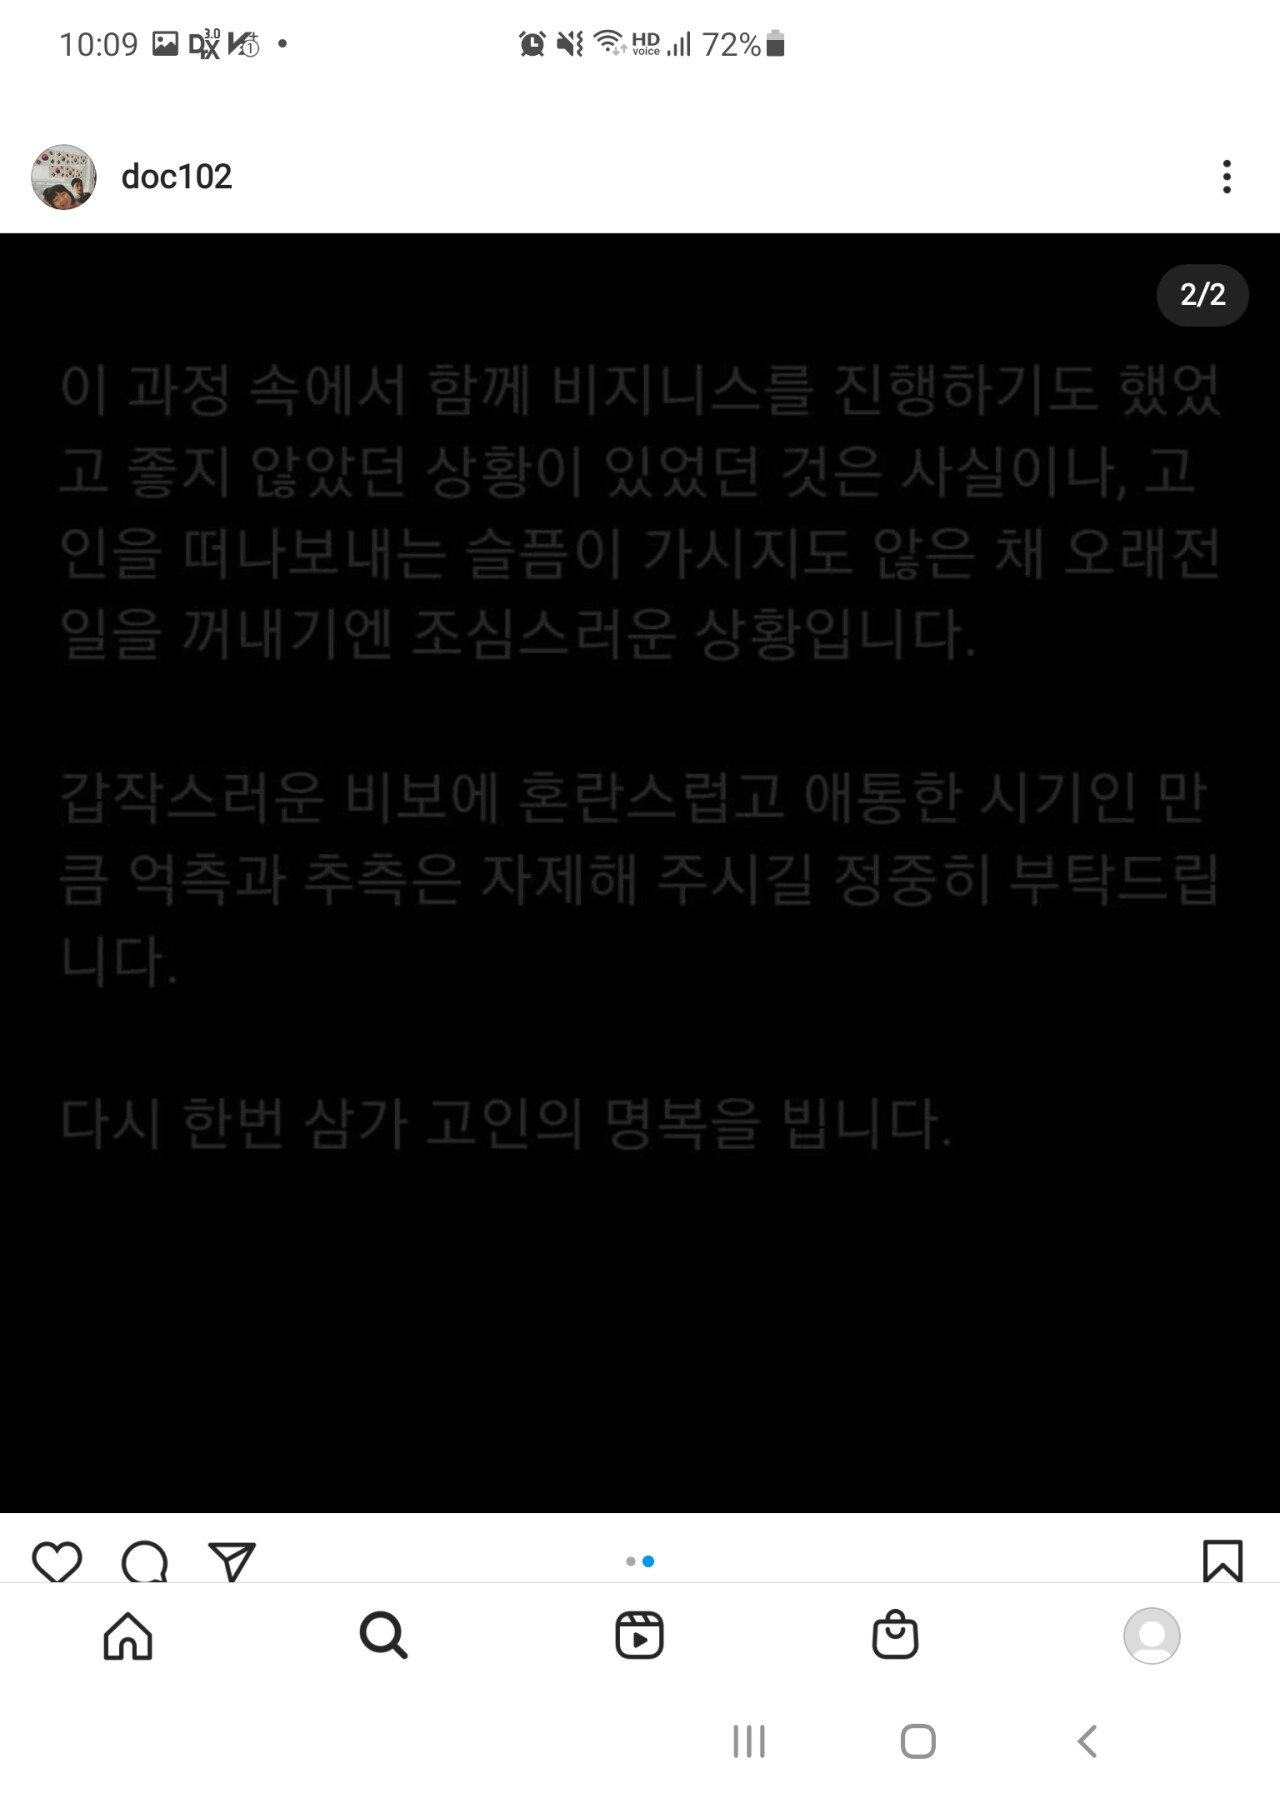 DOC Kim Chang-ryul posted a statement on Instagram